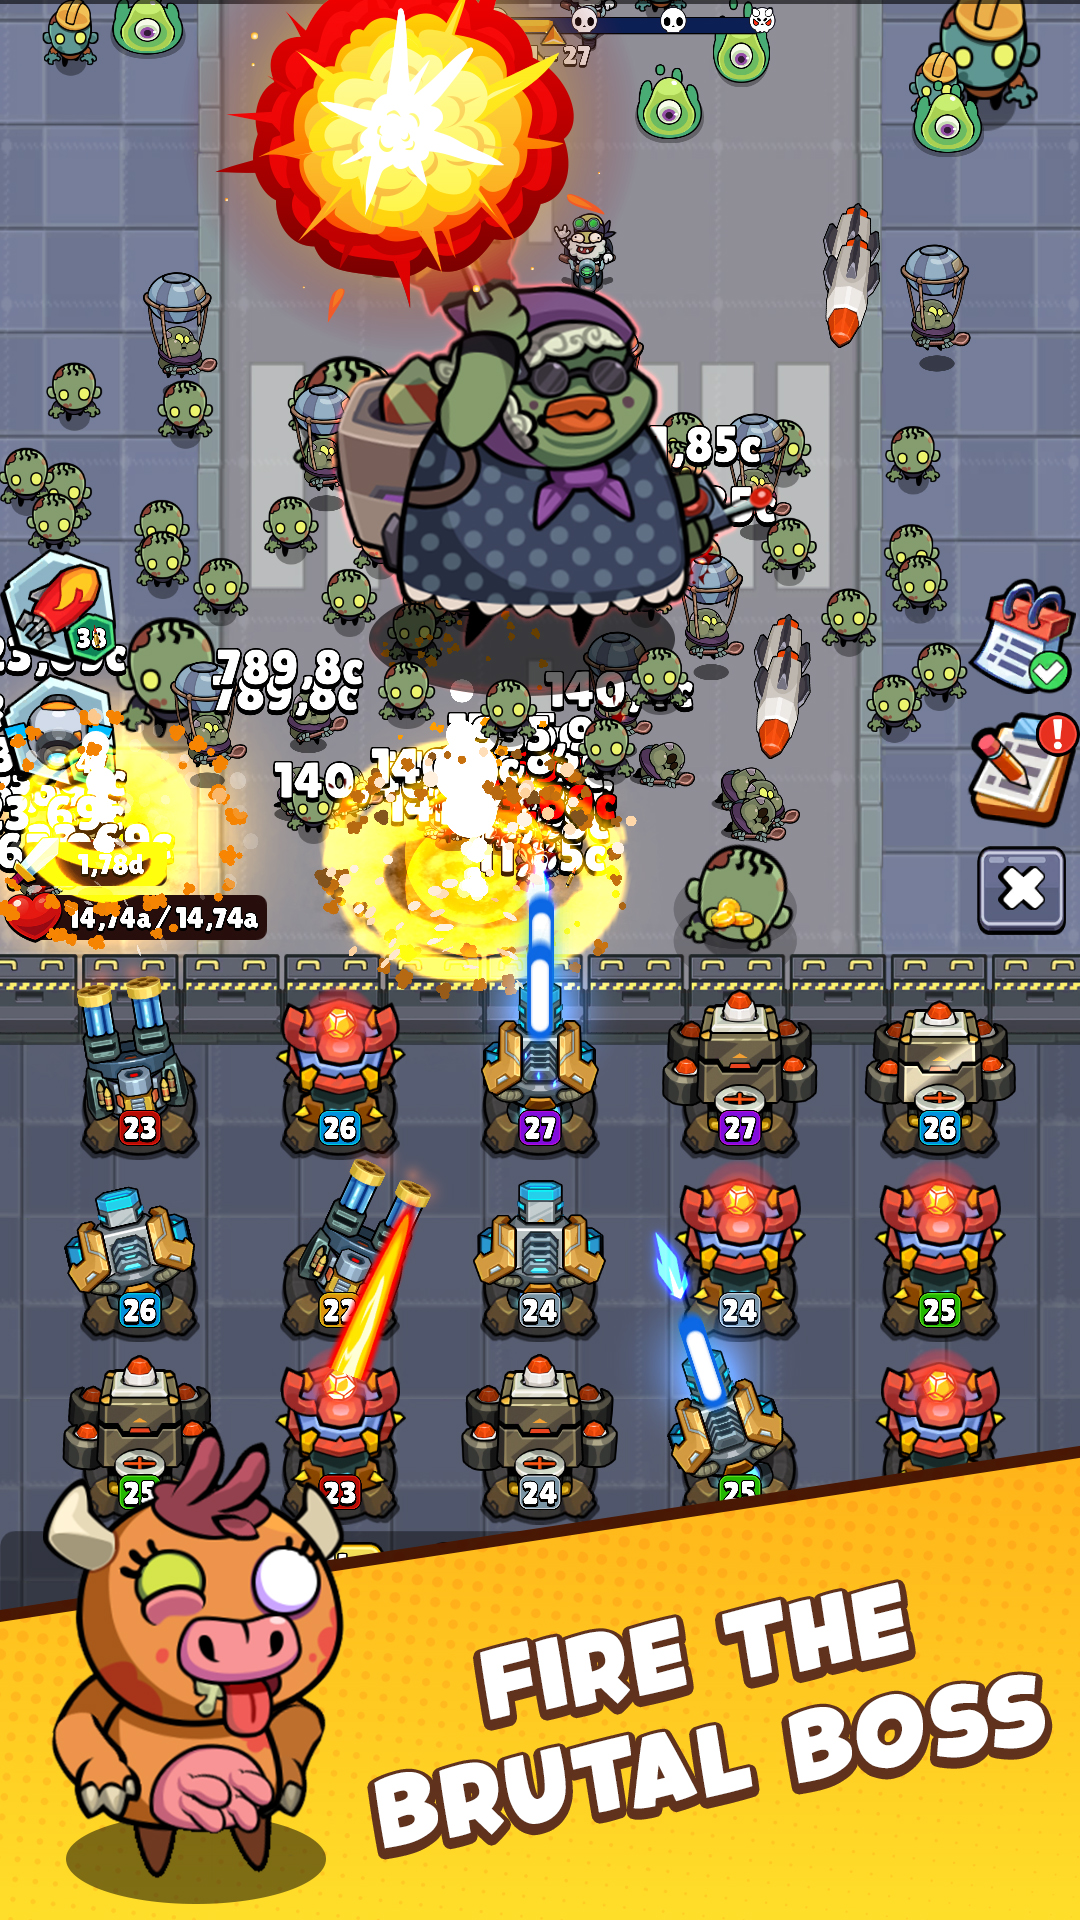 Merge Cannon - Idle zombie war - Android game screenshots.